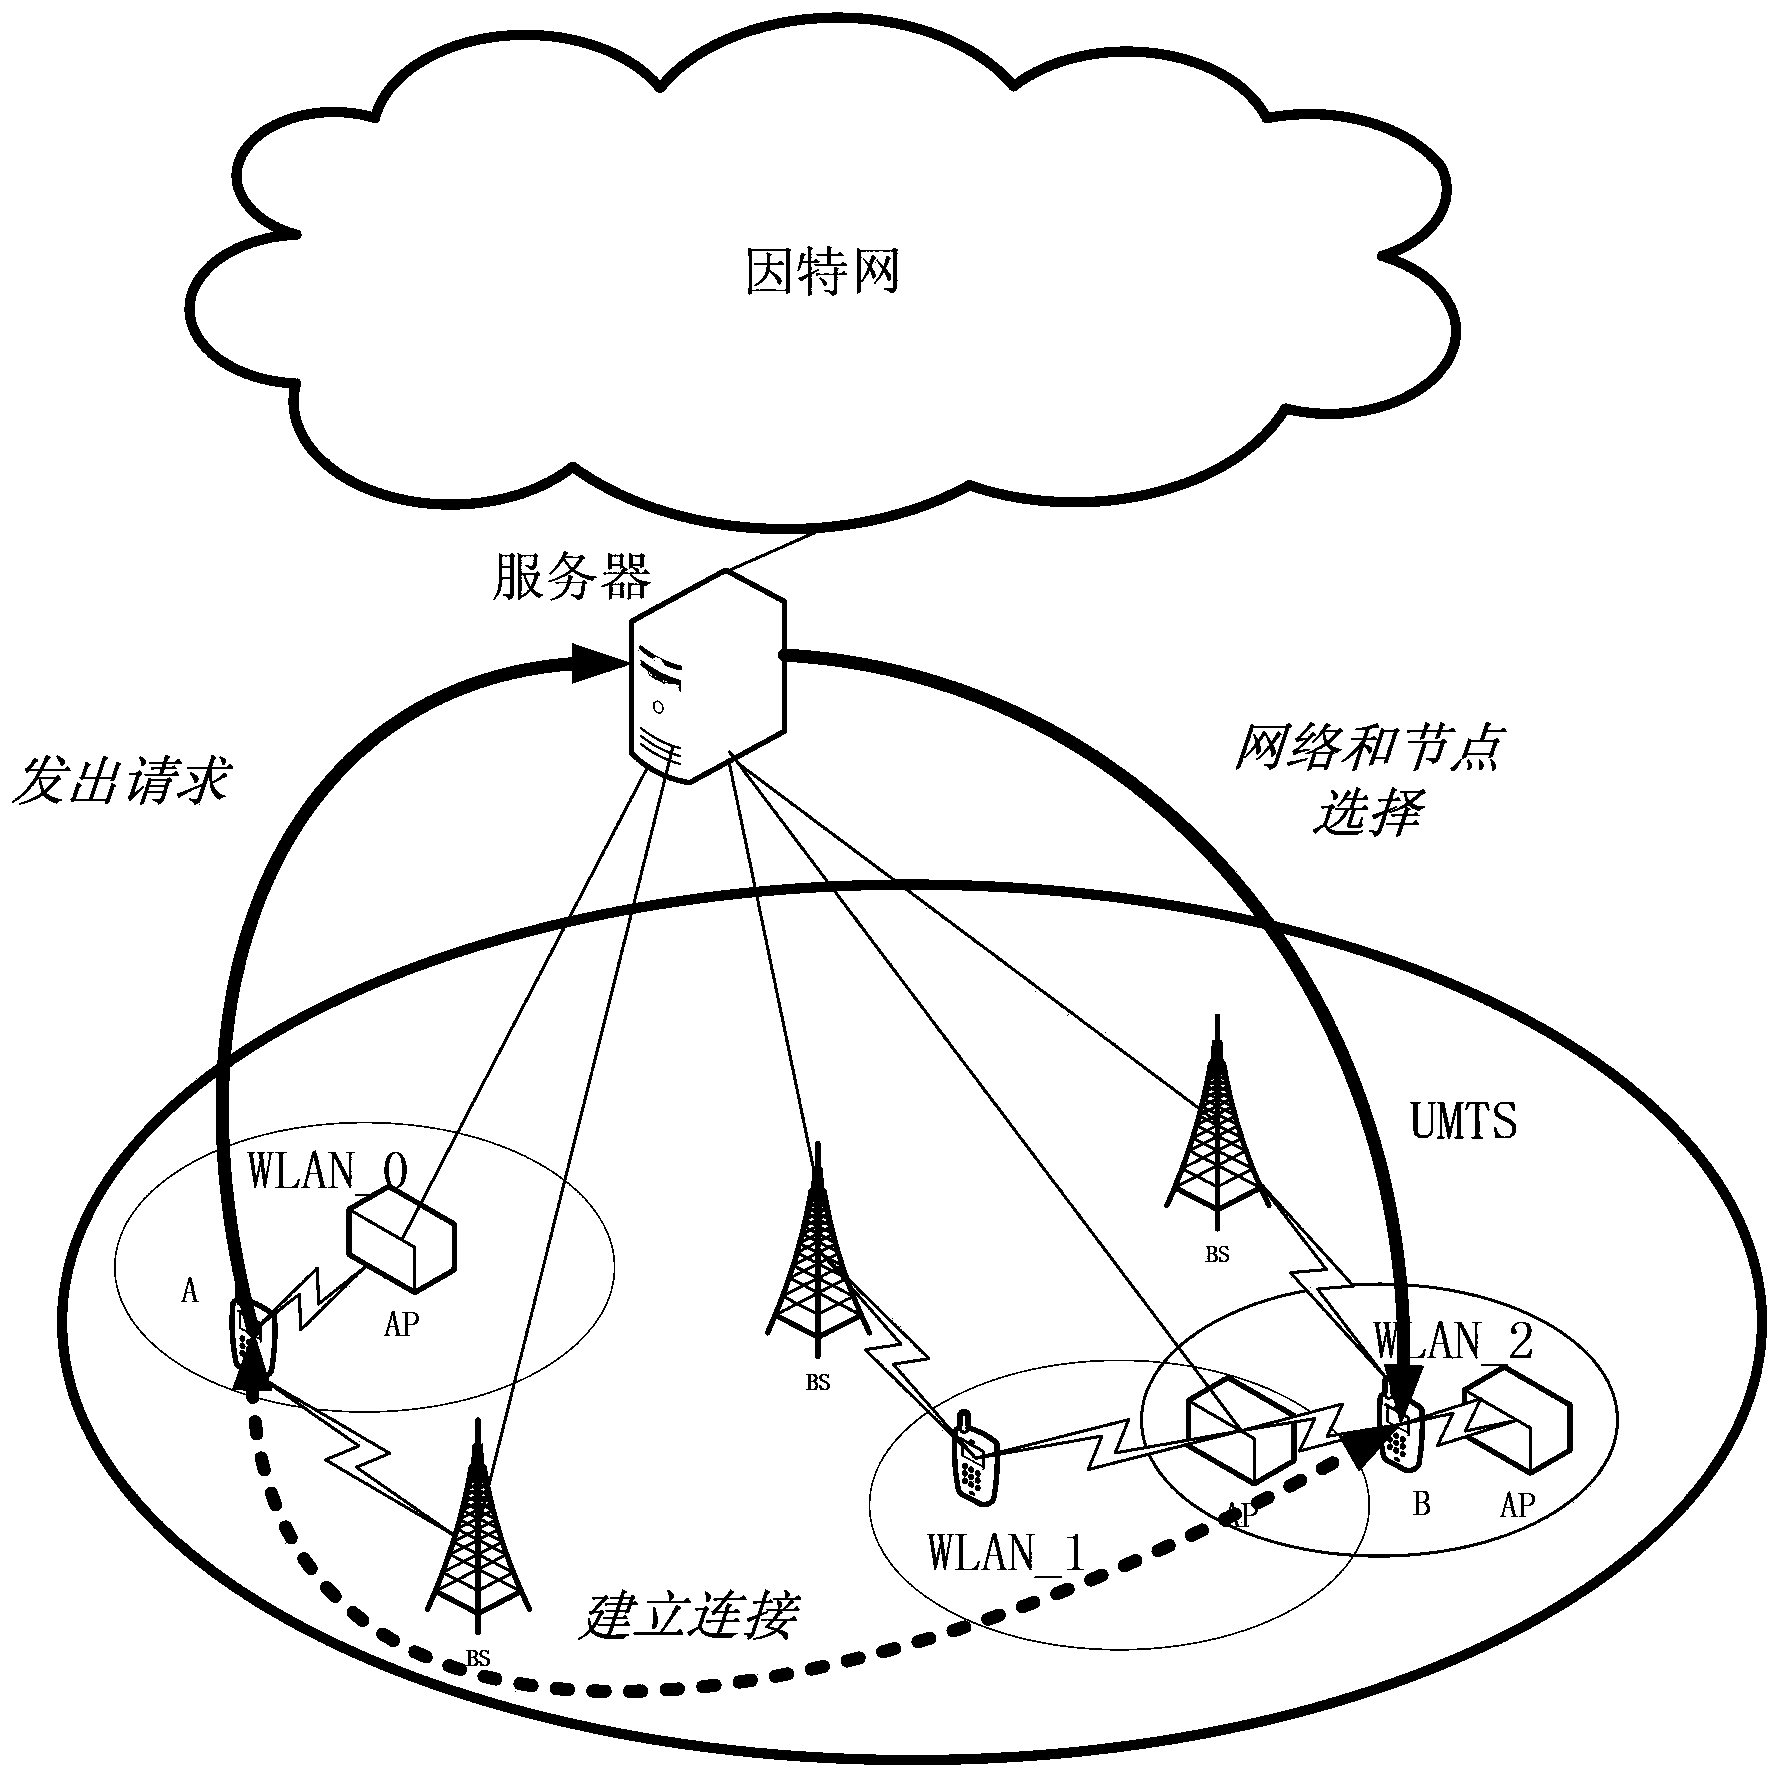 Mobile P2P (peer-to-peer) node selection method and system in heterogeneous wireless network